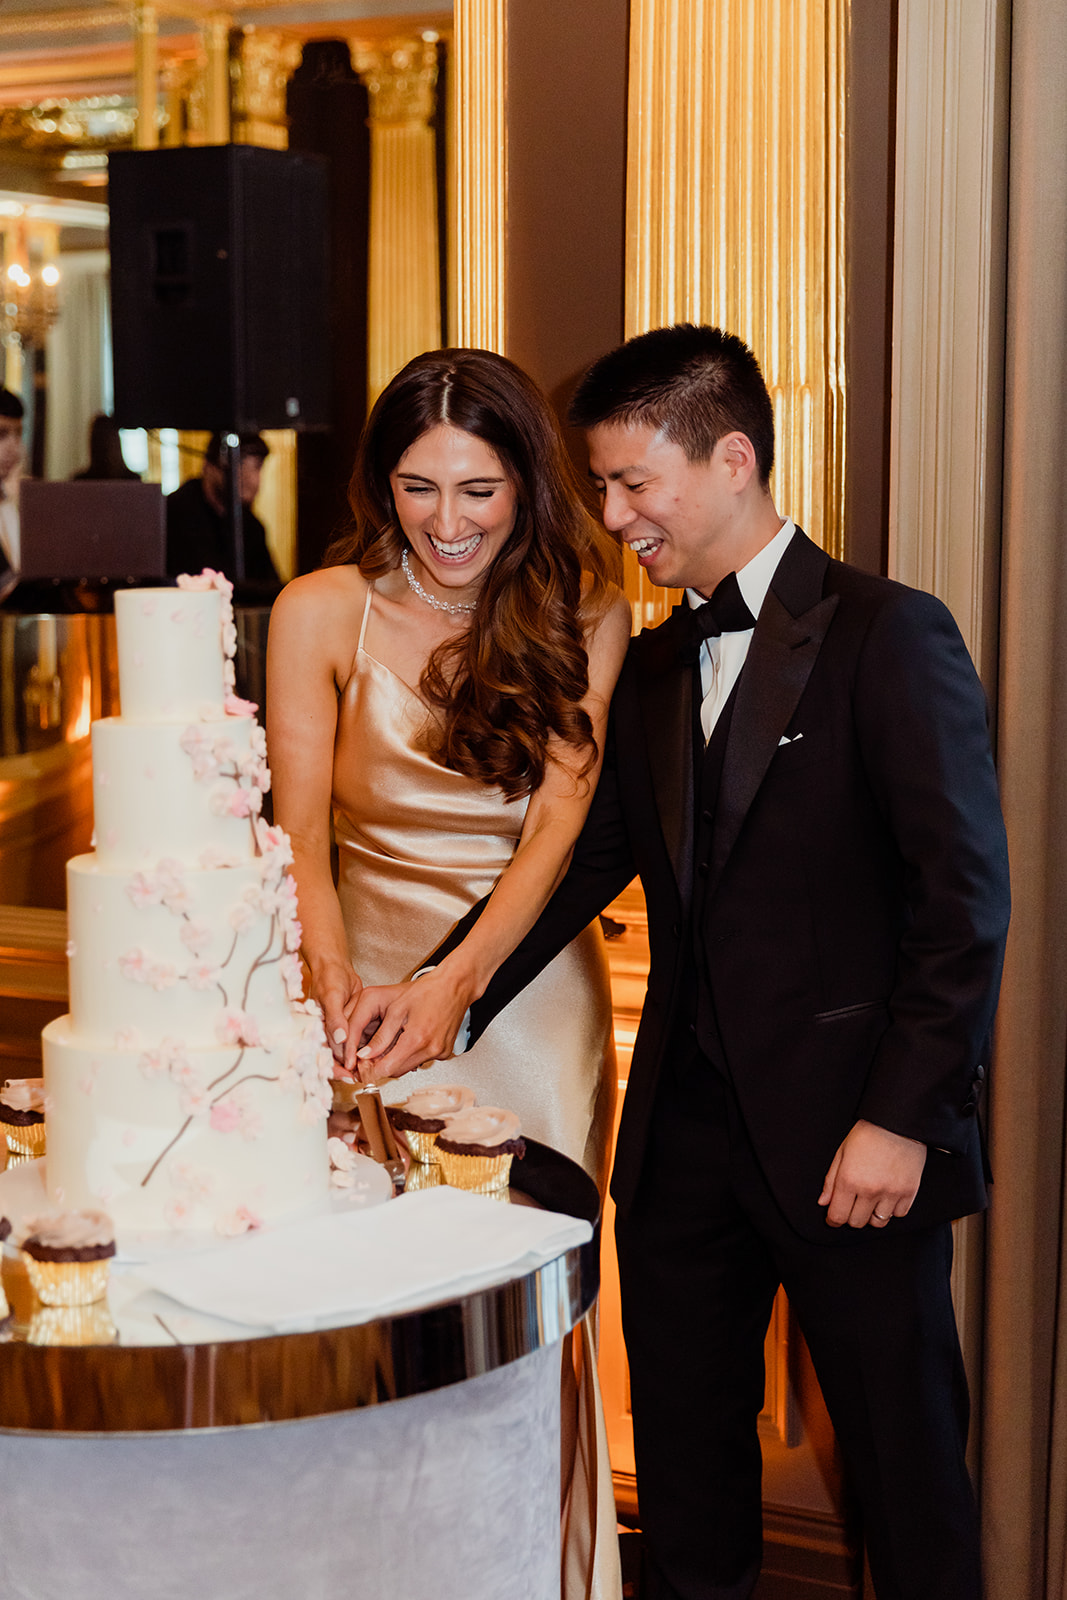 couple cutting the wedding cake at the wedding reception at Cafe Royal Hotel in London